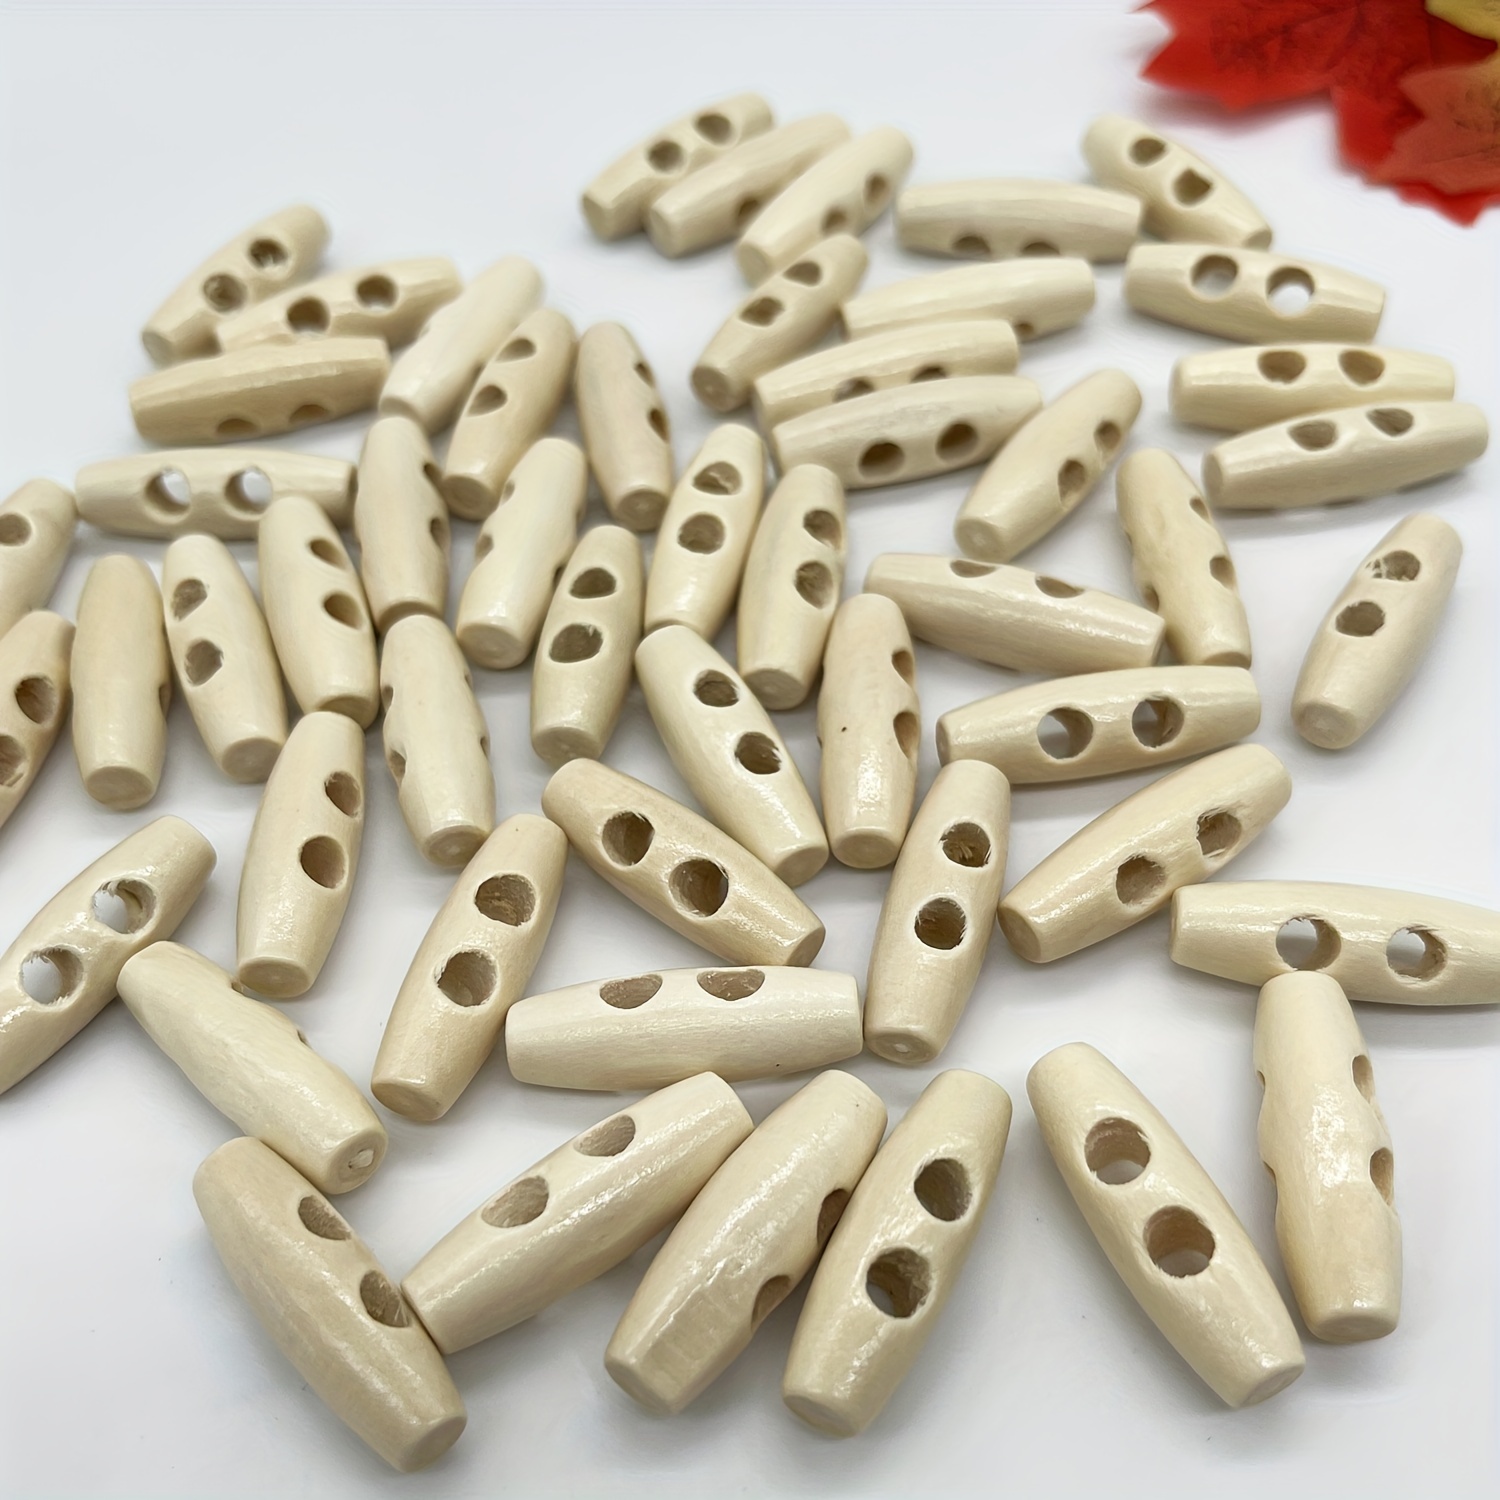  50Pcs Wood Toggle Buttons, 30mm Double Holes Olive Shape Sewing  Wood Toggle Buttons Sewing Buttons for DIY Coat Sweater Clothes Decoration